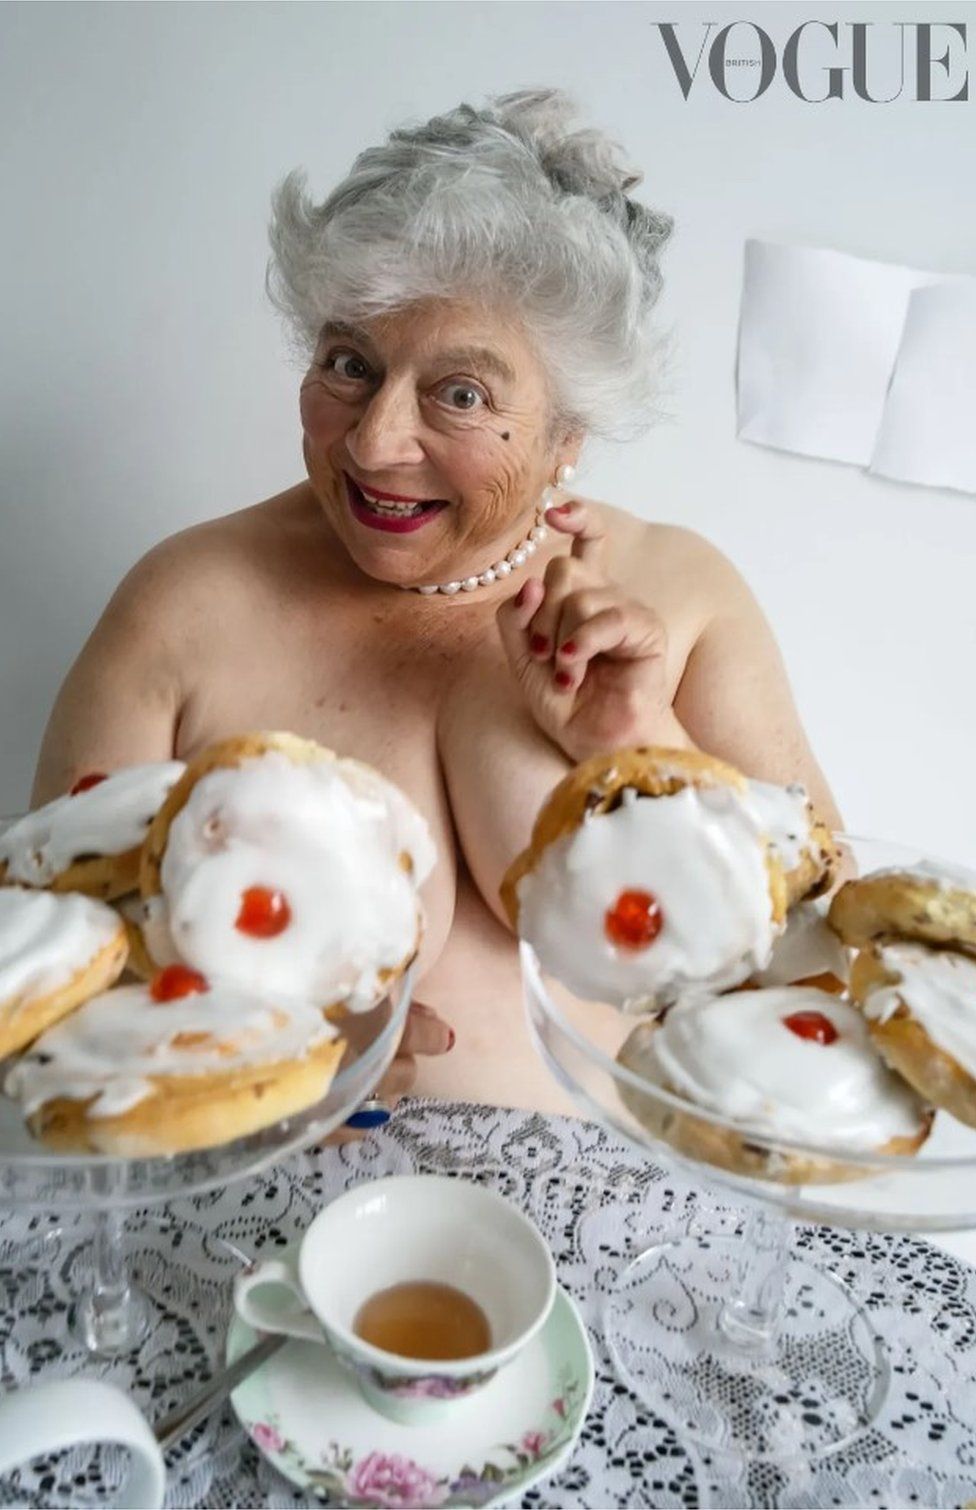 Miriam Margolyes Opens Up About Body Acceptance and Coming Out in Revealing Vogue Cover Shoot